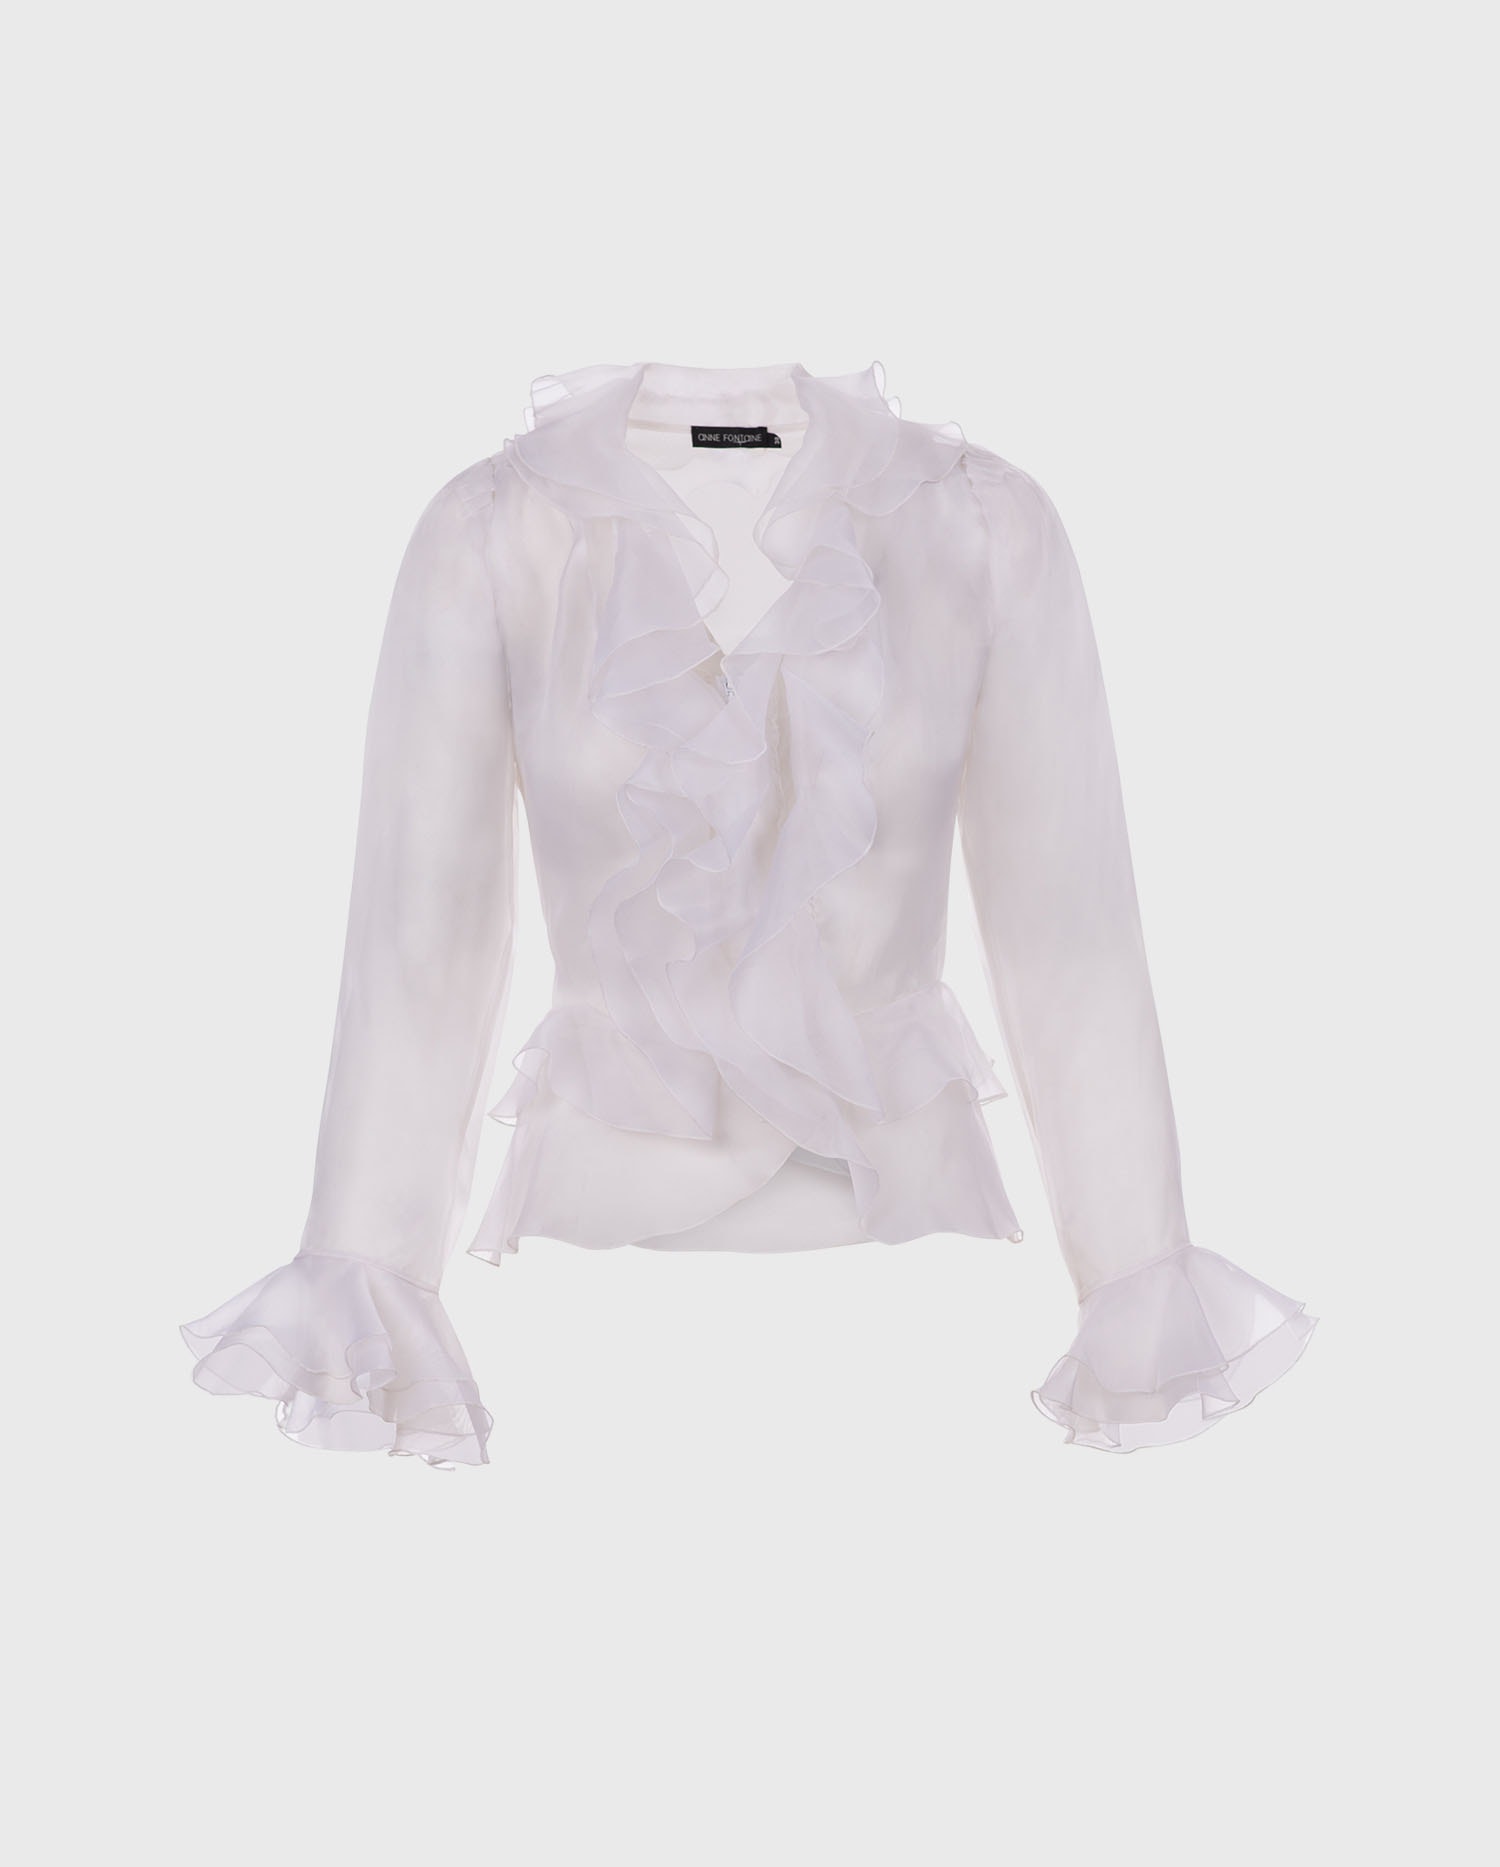 Discover The PEPITA Long Sleeve Silk Shirt With Double Ruffles From ANNE FONTAINE